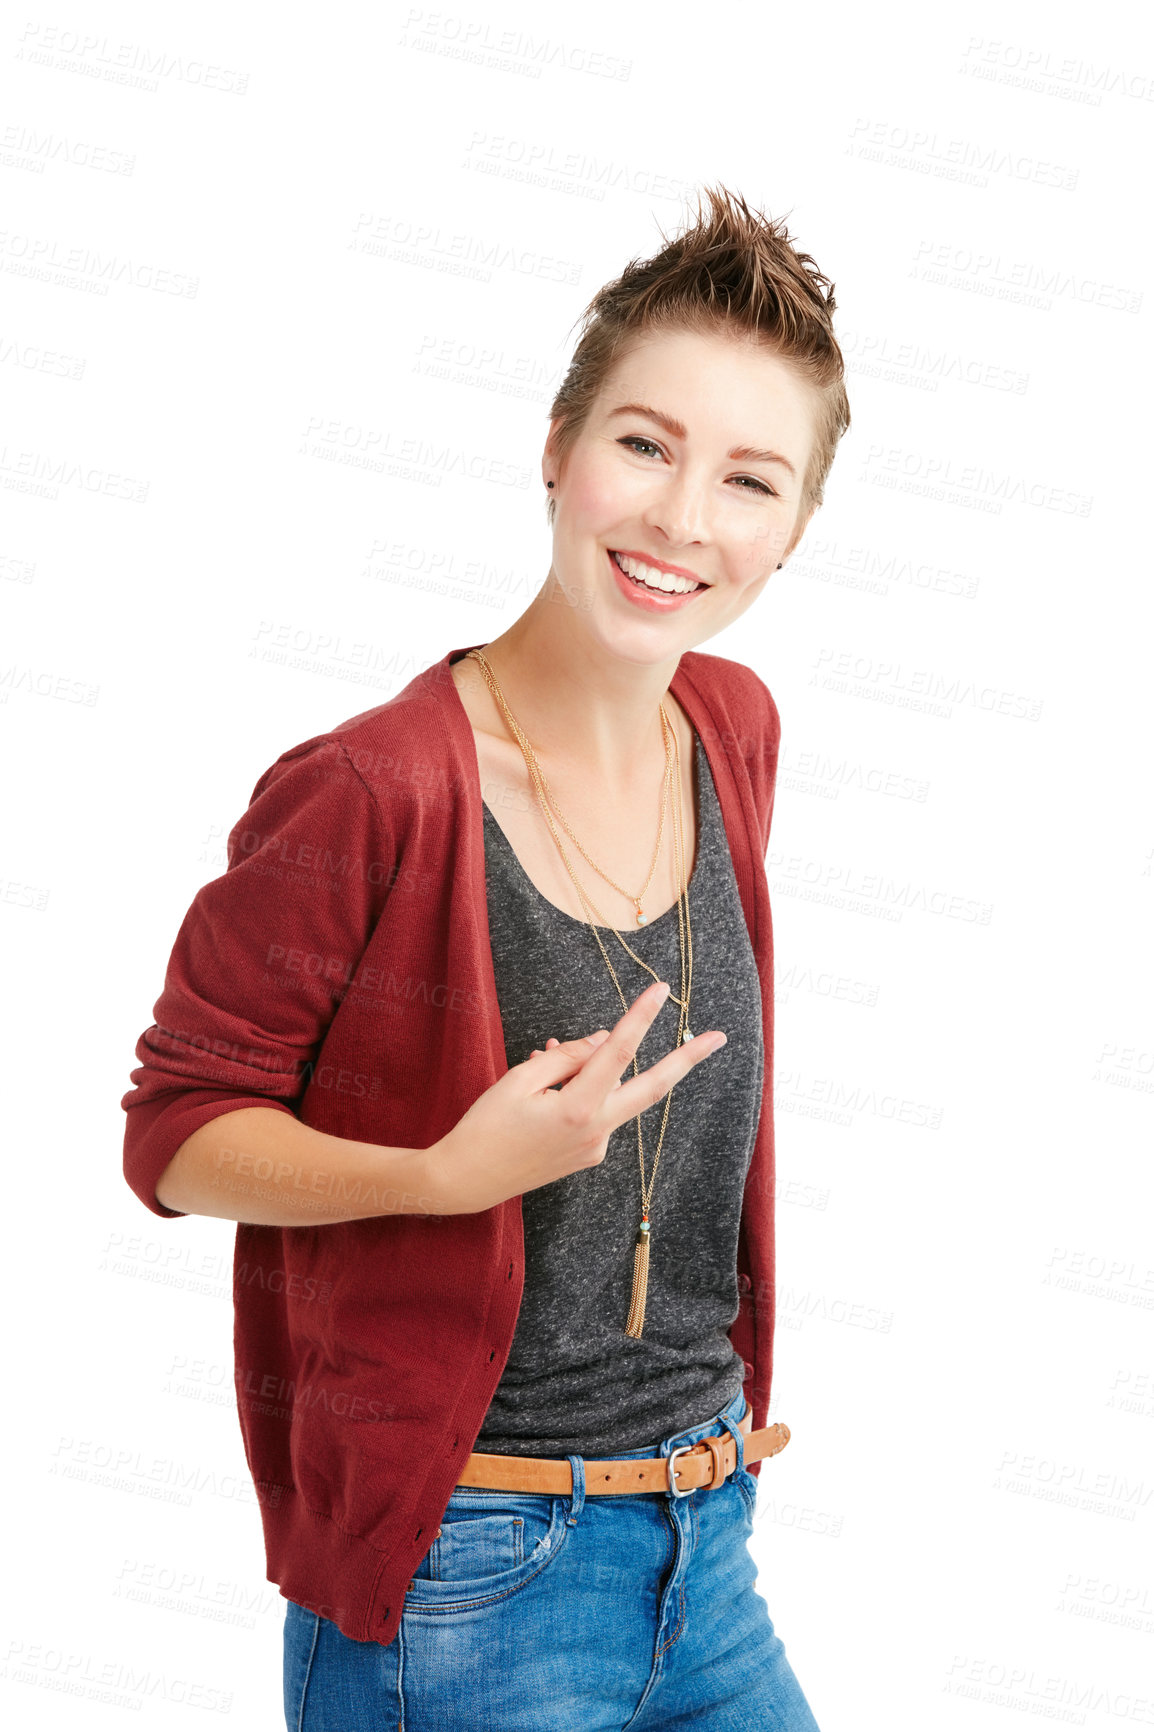 Buy stock photo Studio portrait of a young woman showing the v sign against a white background